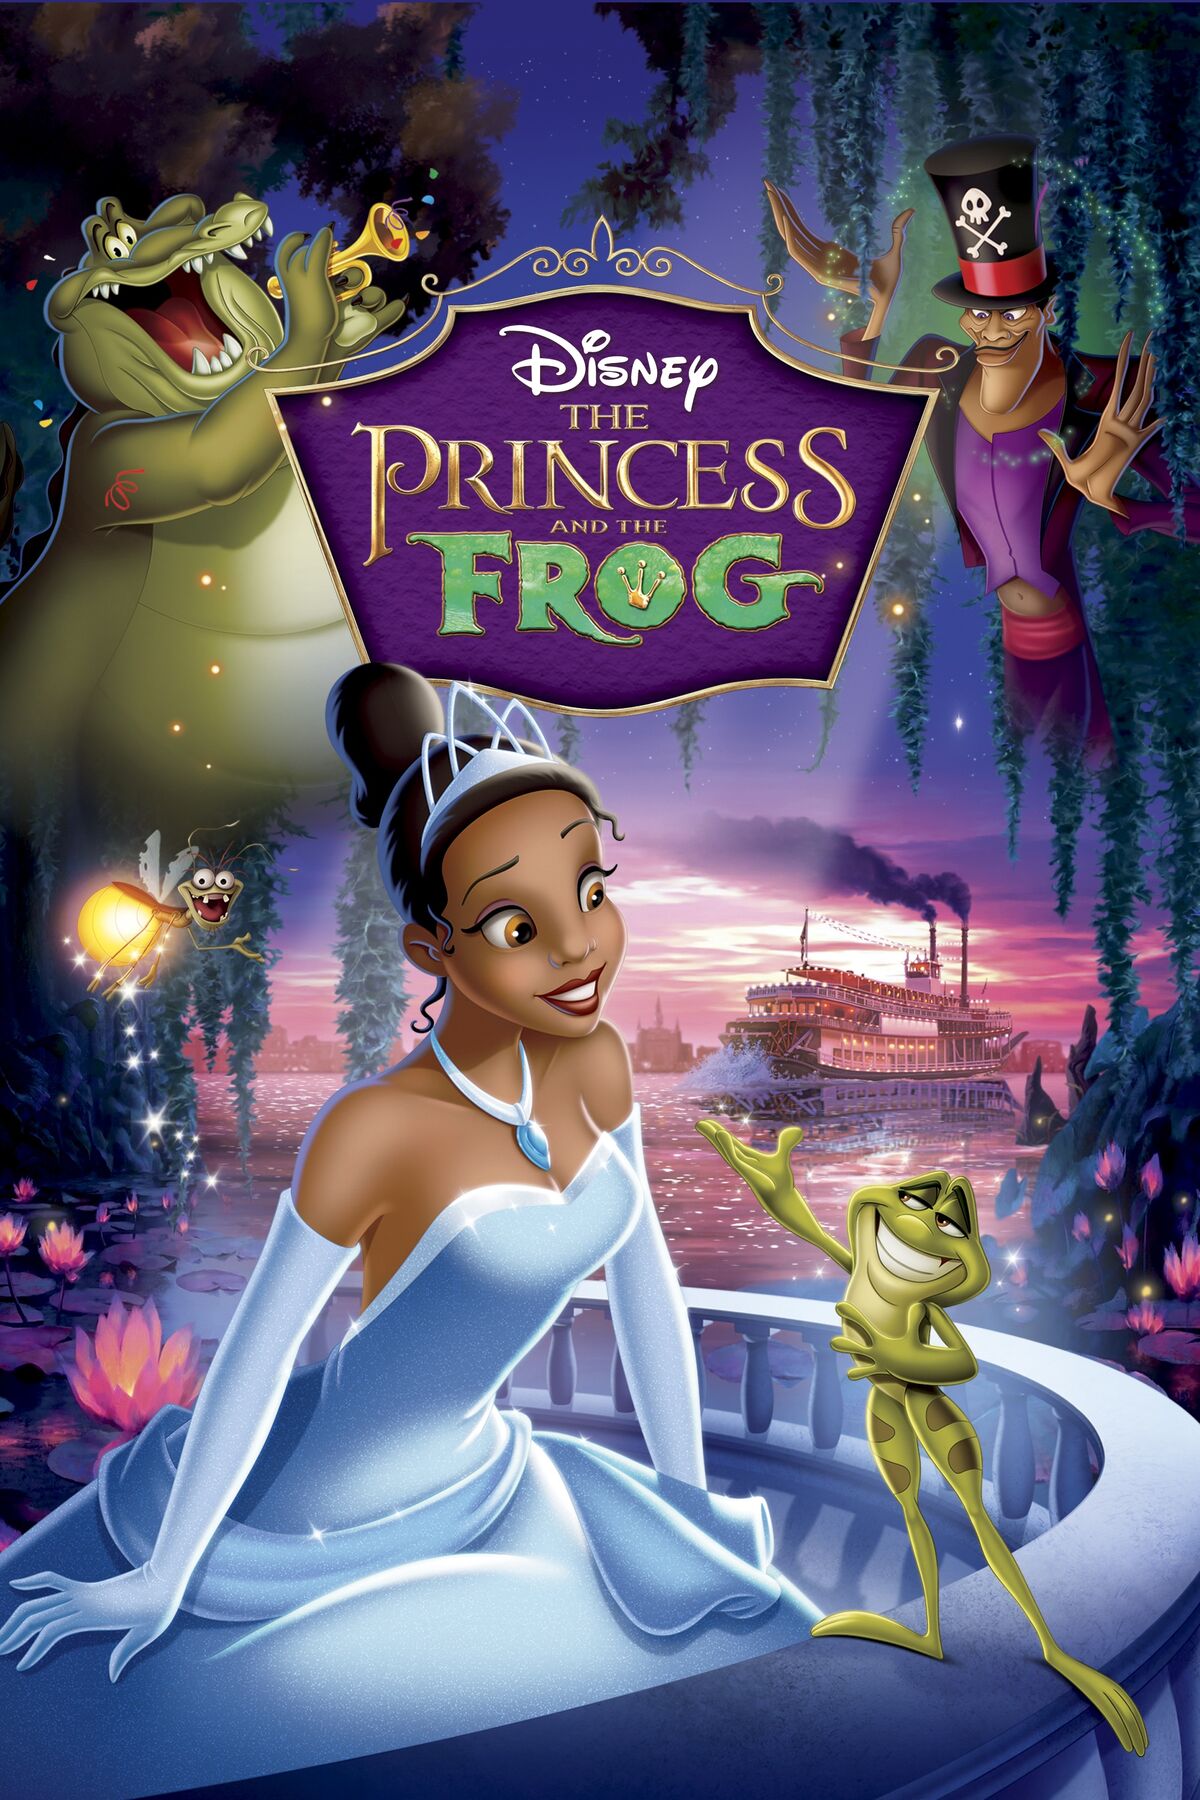 Tiana's Magical Journey, The Princess and The Frog